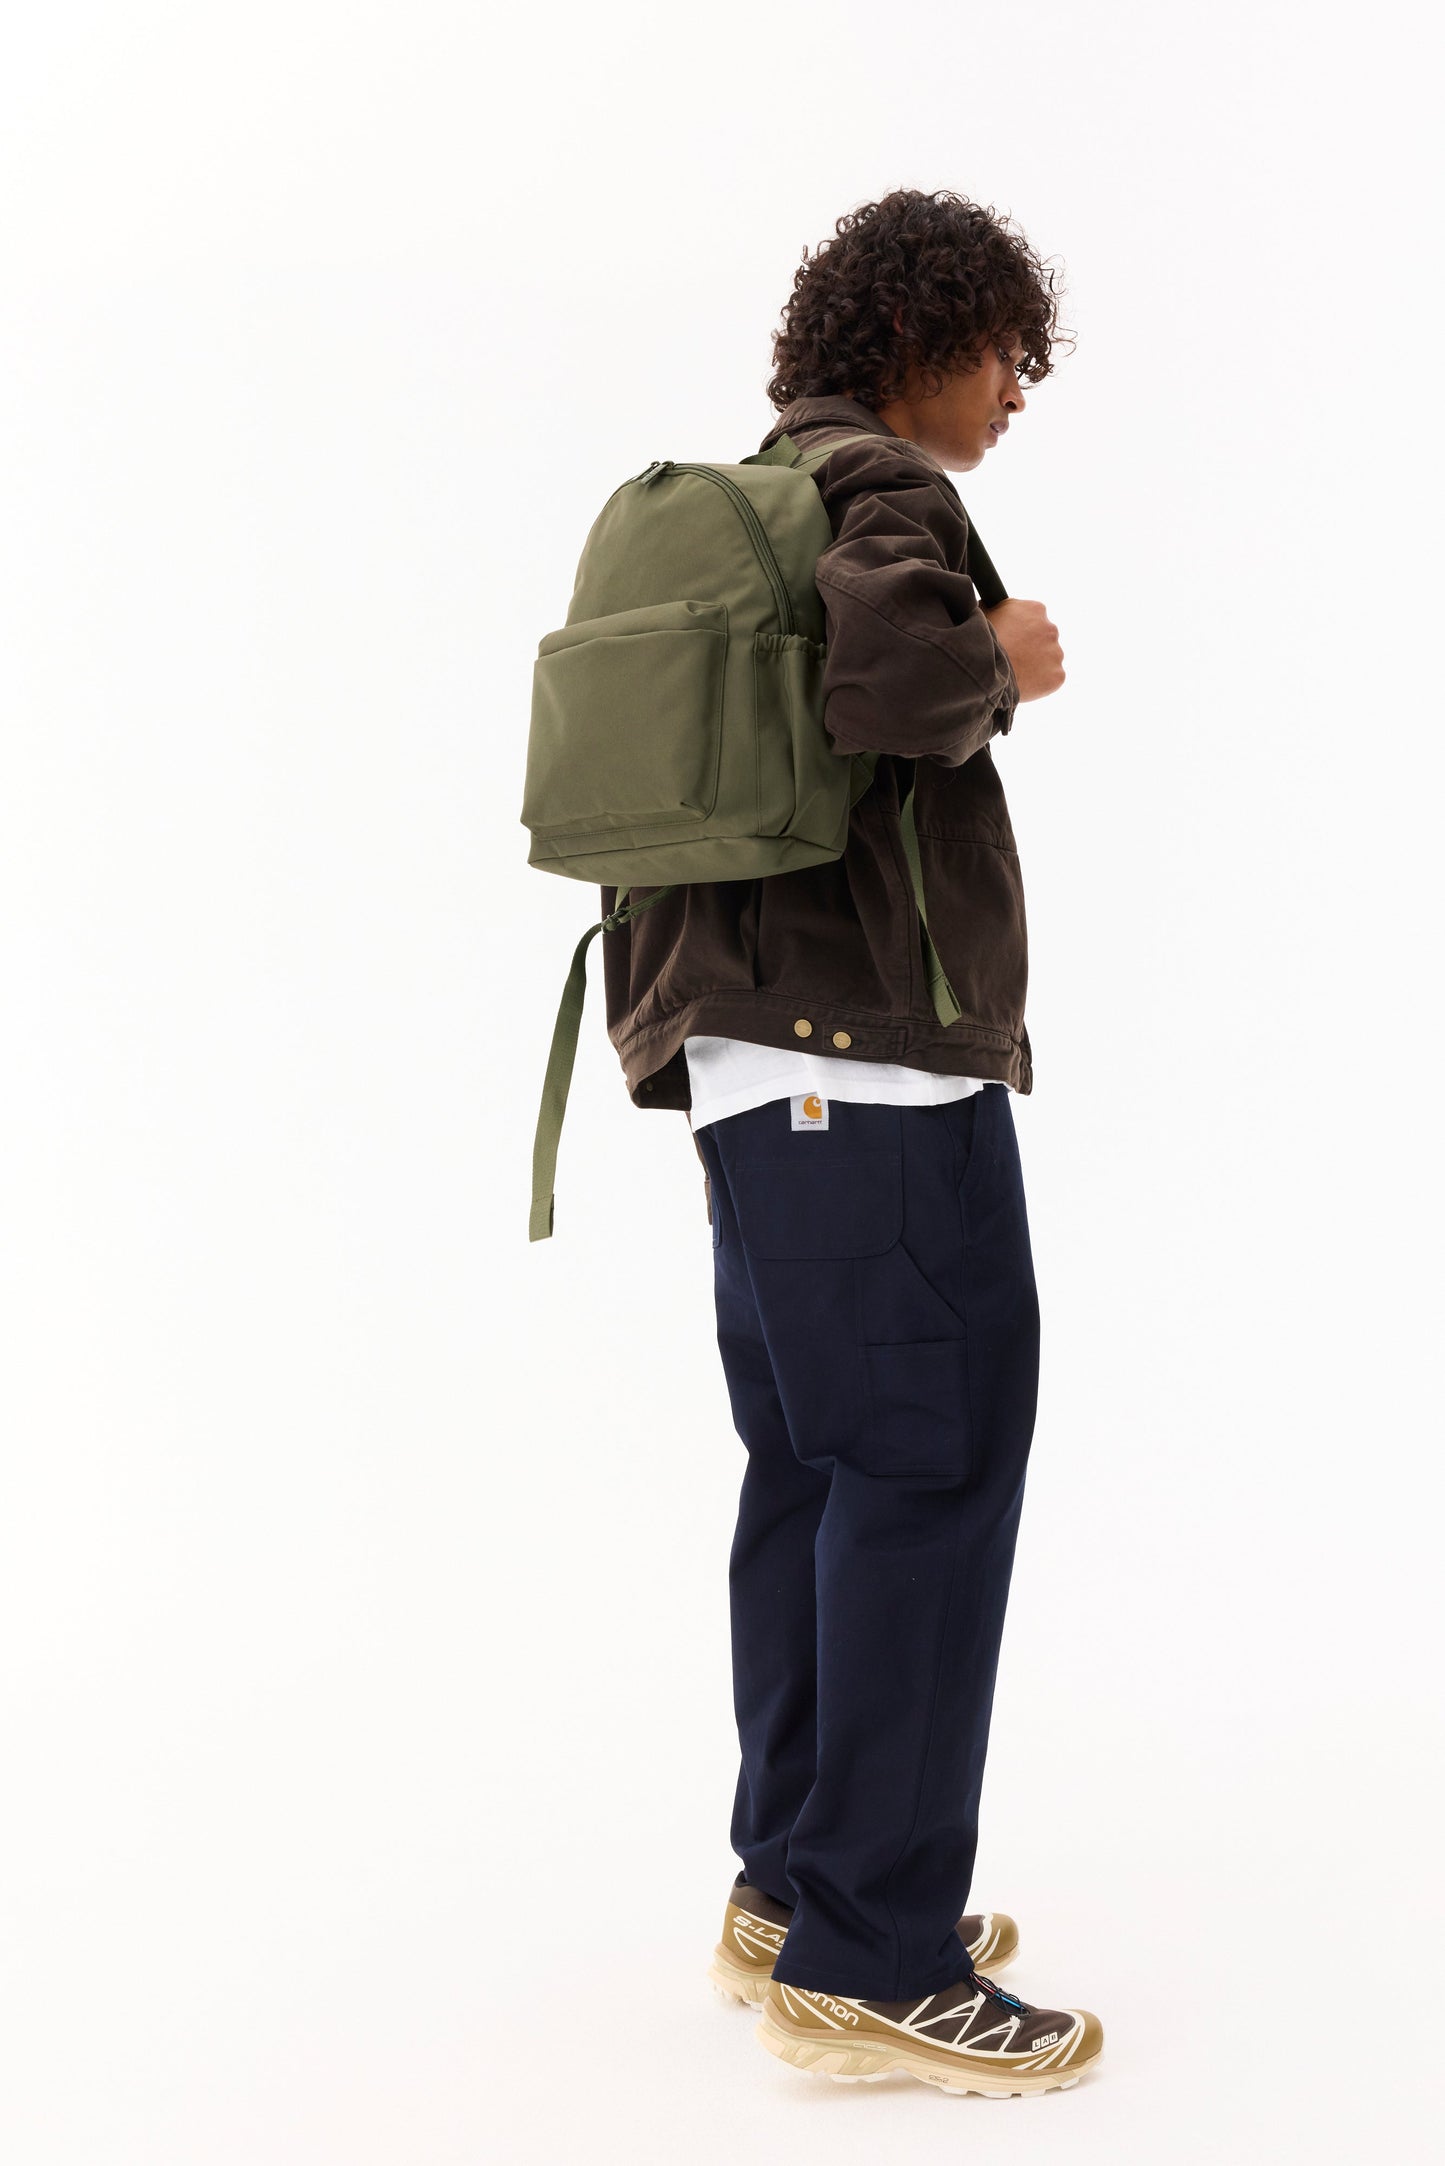 The BÉISics Backpack in Olive